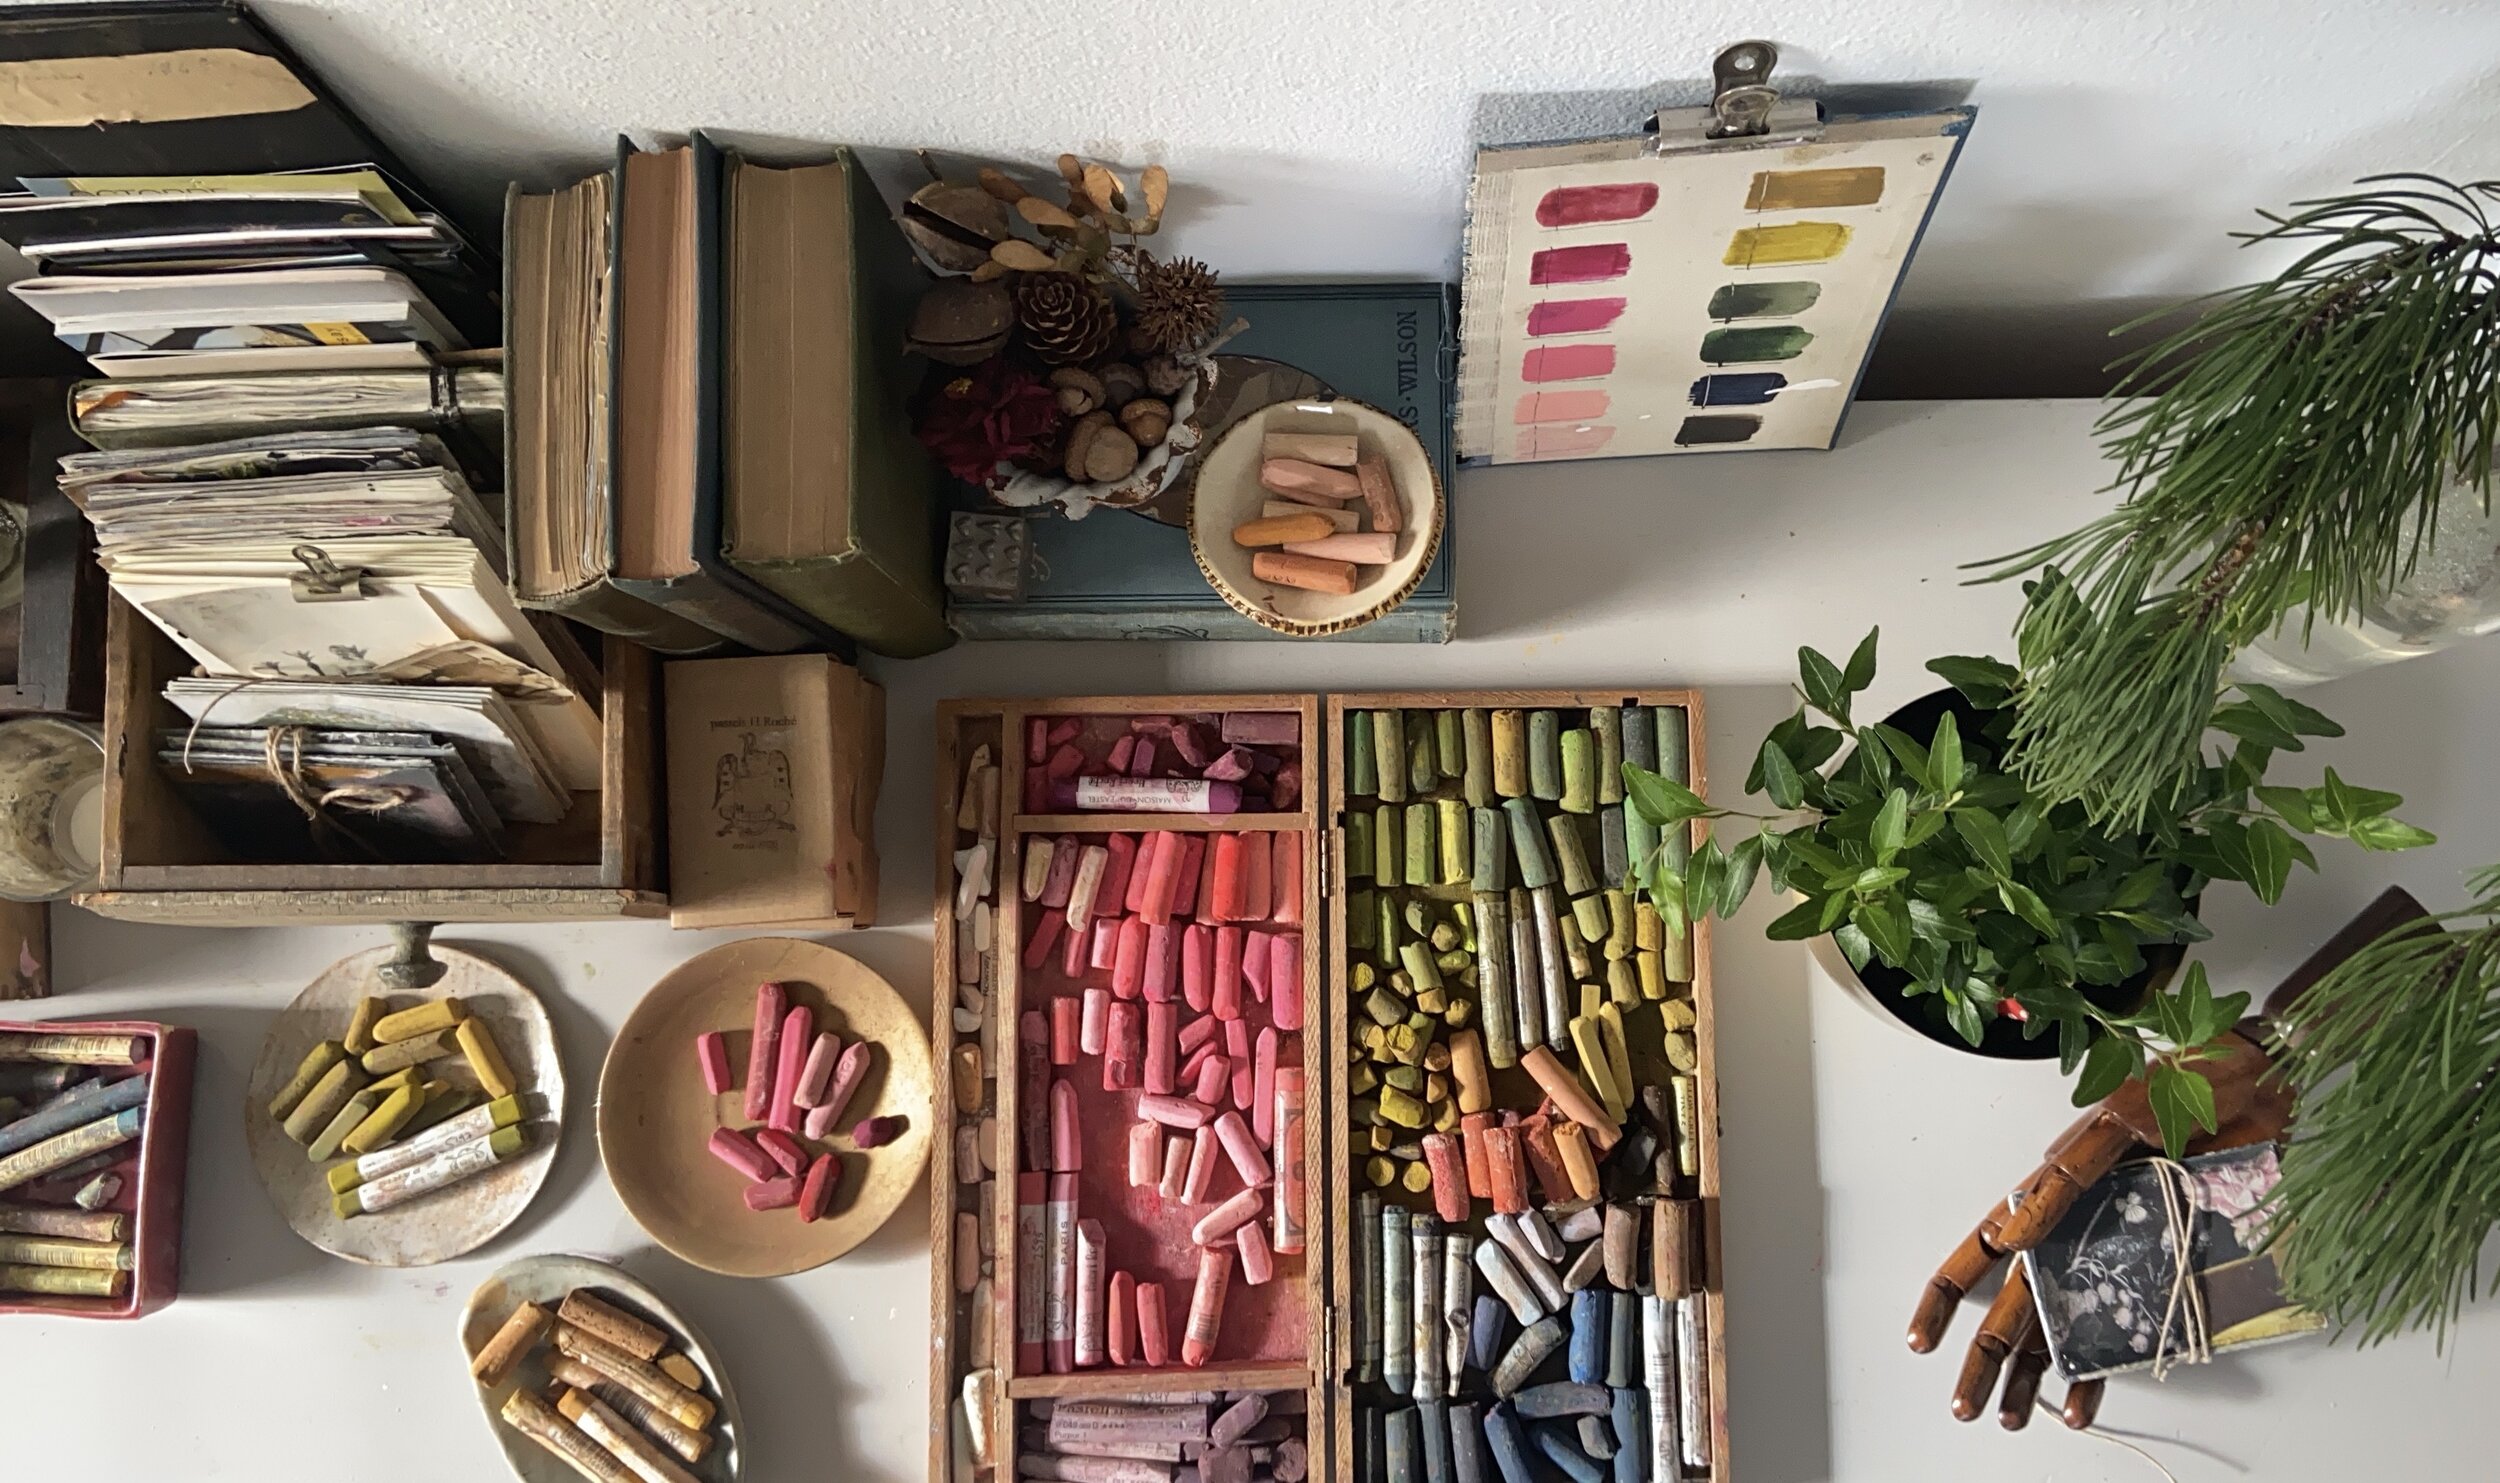 How to Organize Mixed Media Supplies 